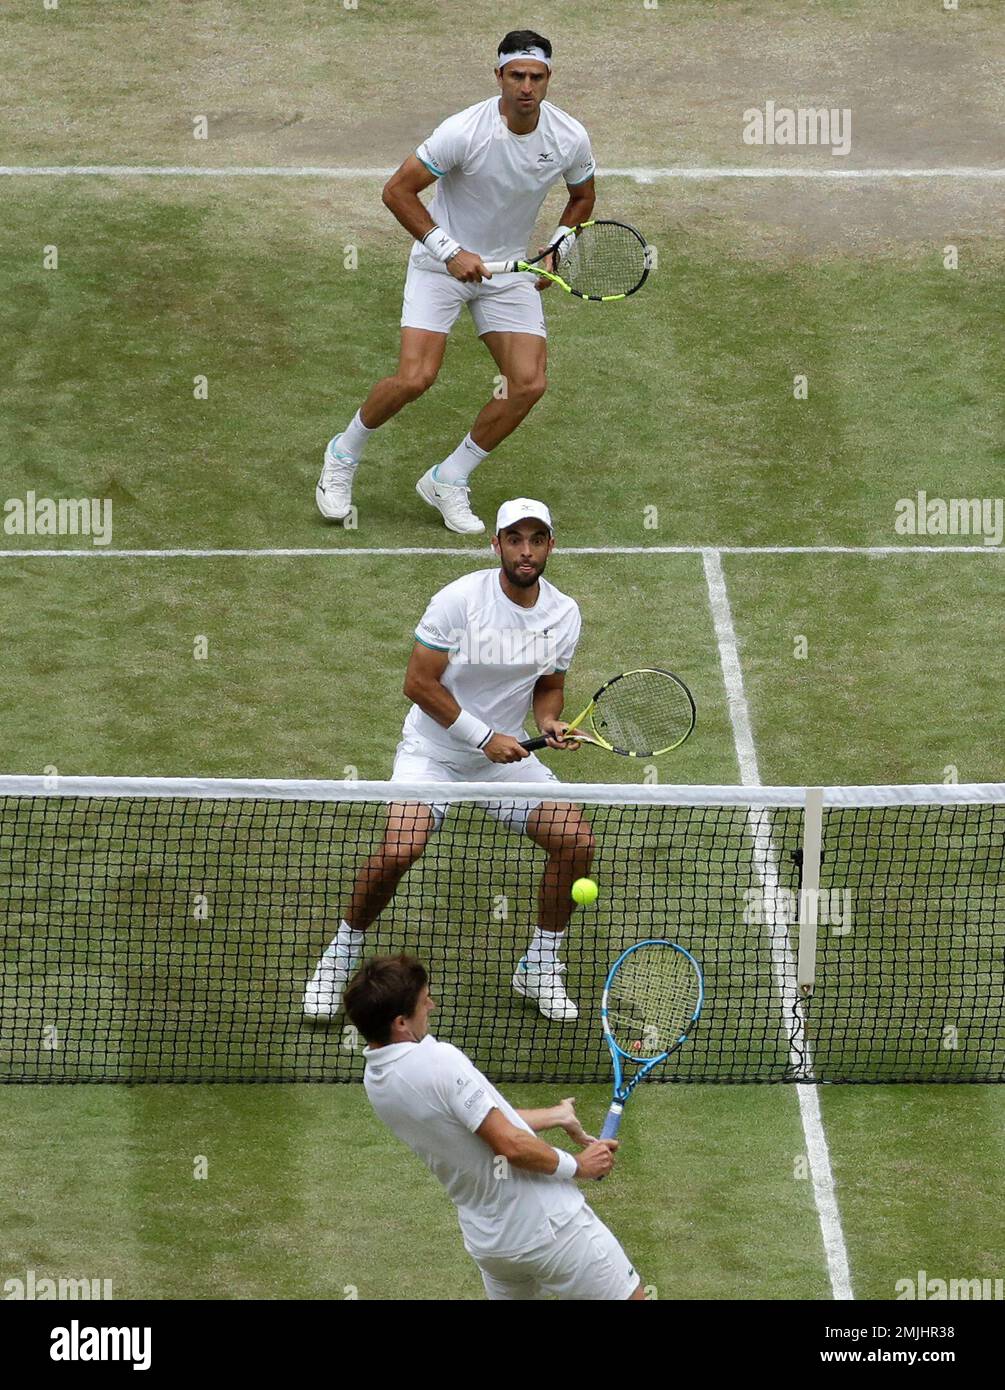 Colombias Juan Sebastian Cabal and Robert Farah, top, in action against Frances Nicolas Mahut and Edouard Roger-Vasselin during the mens doubles final match on day twelve of the Wimbledon Tennis Championships in